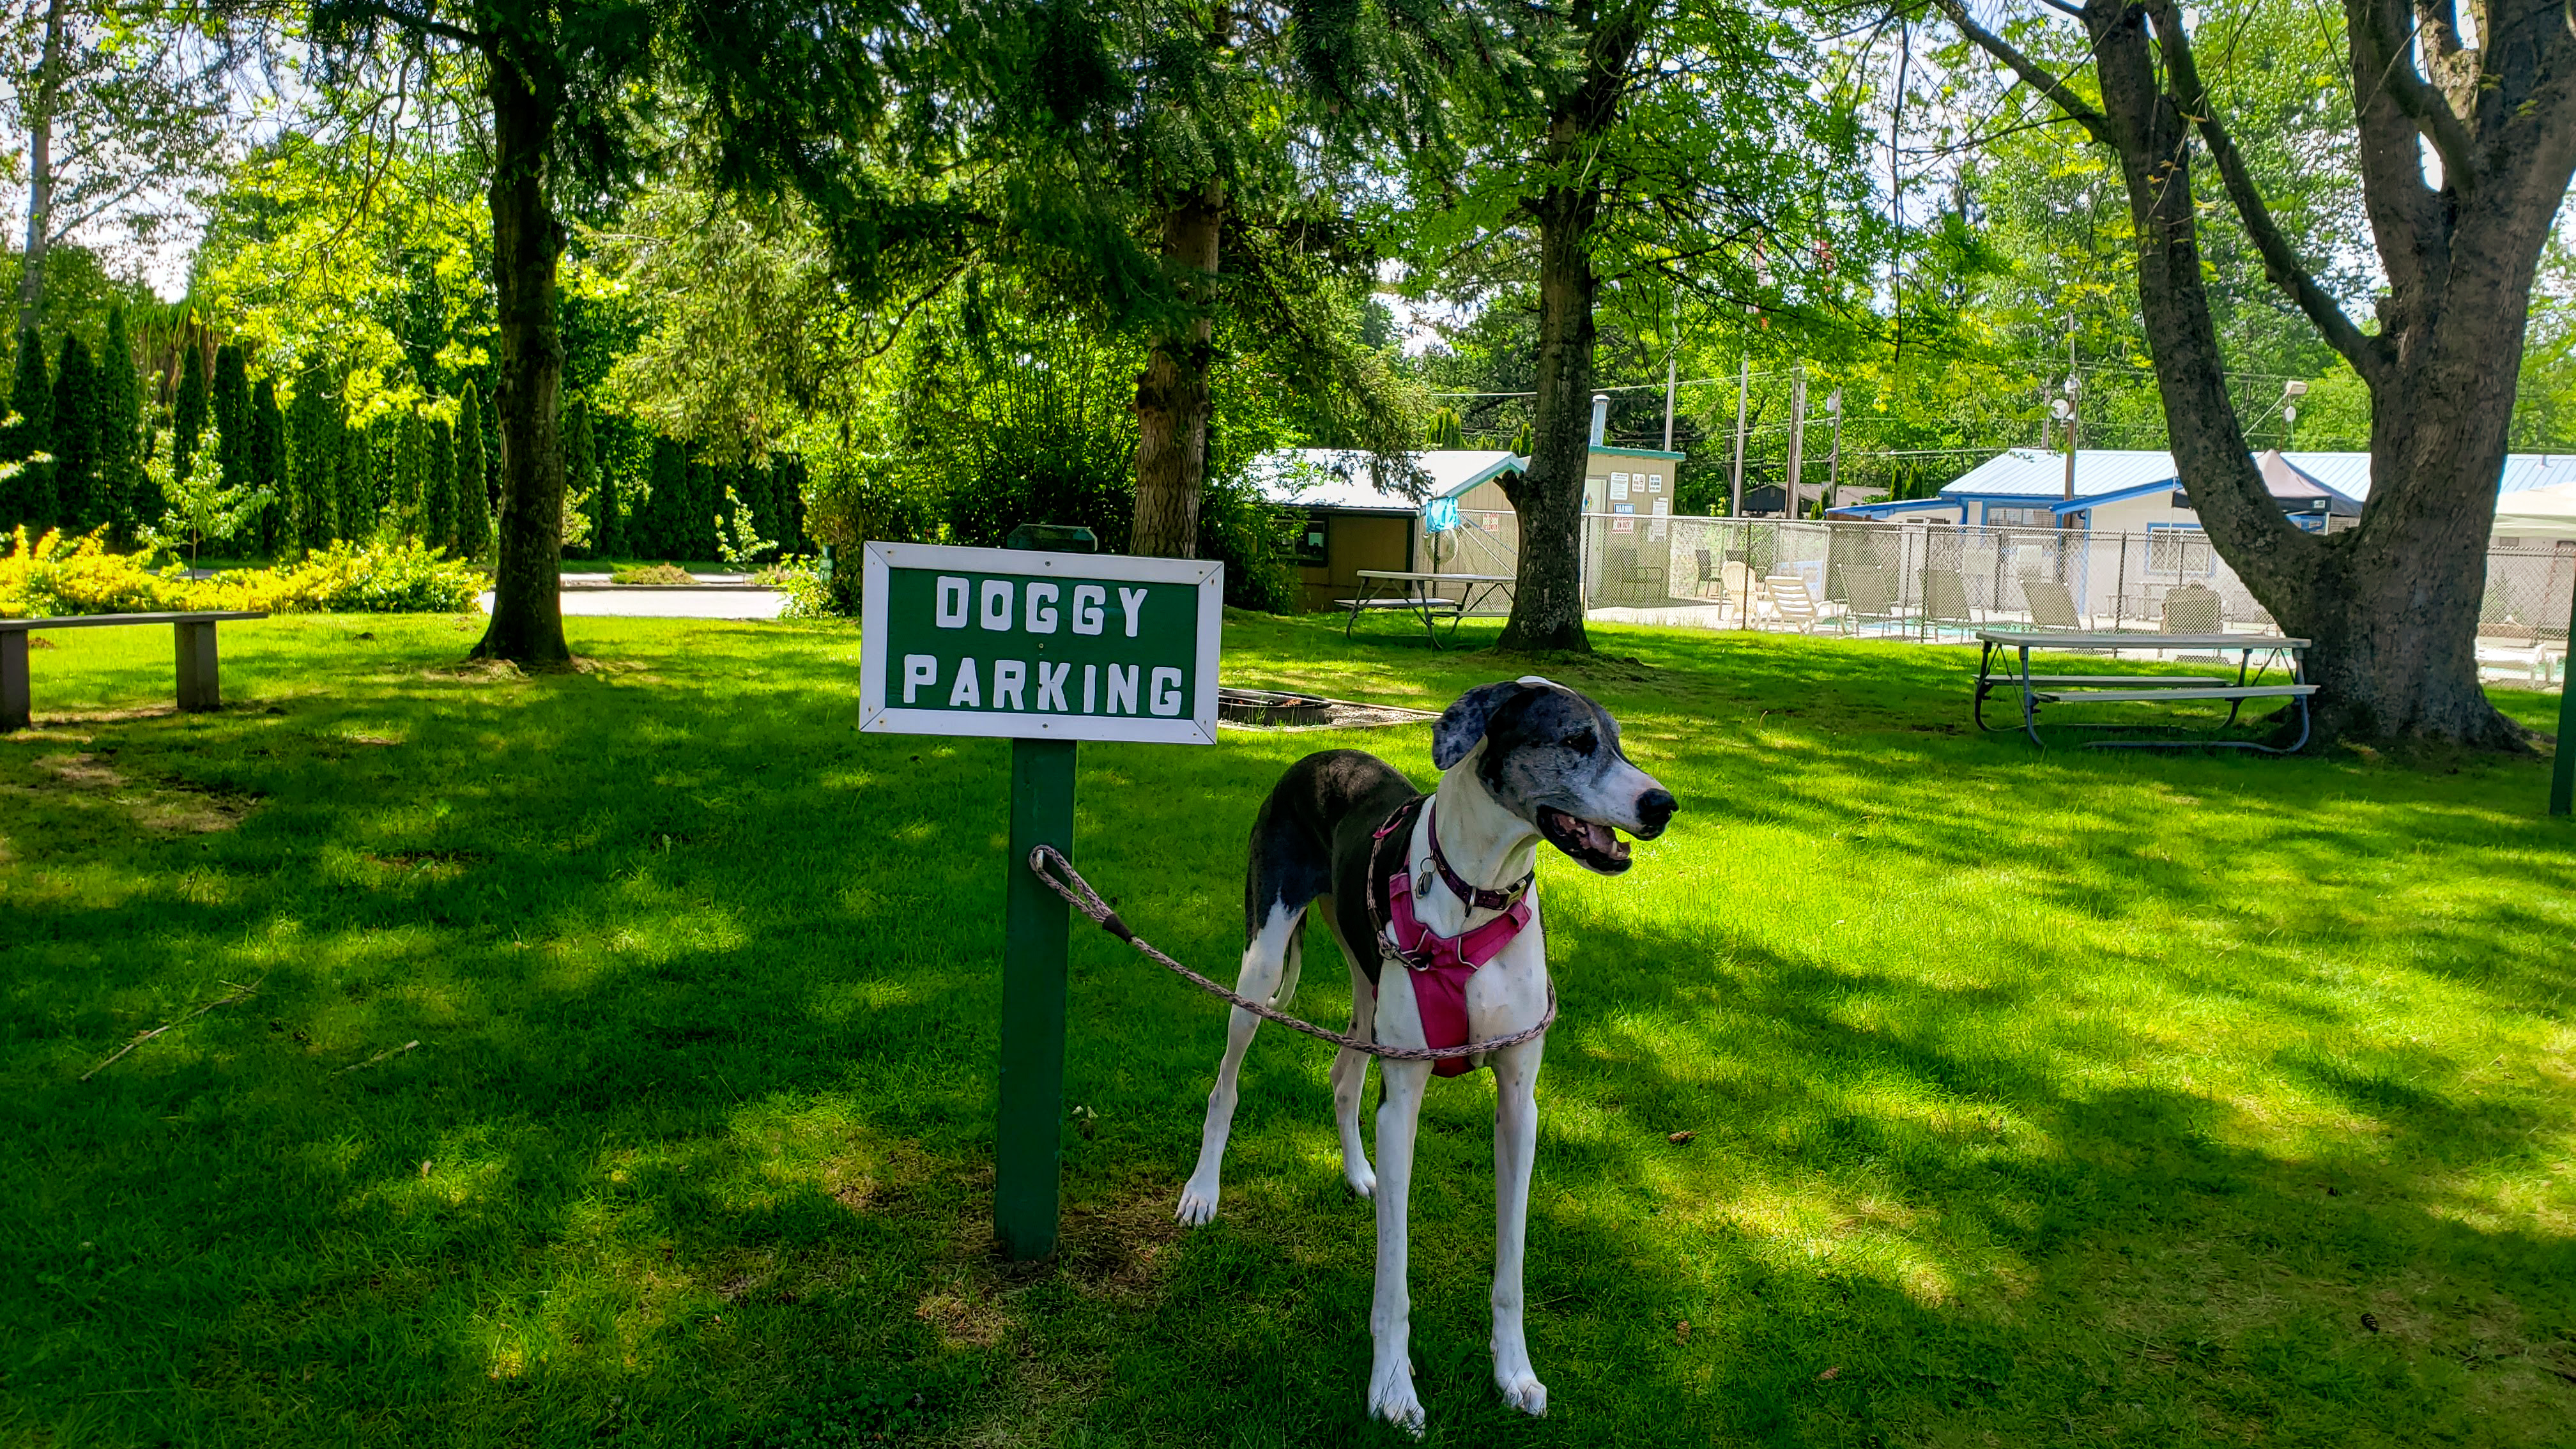 Doggy Parking!